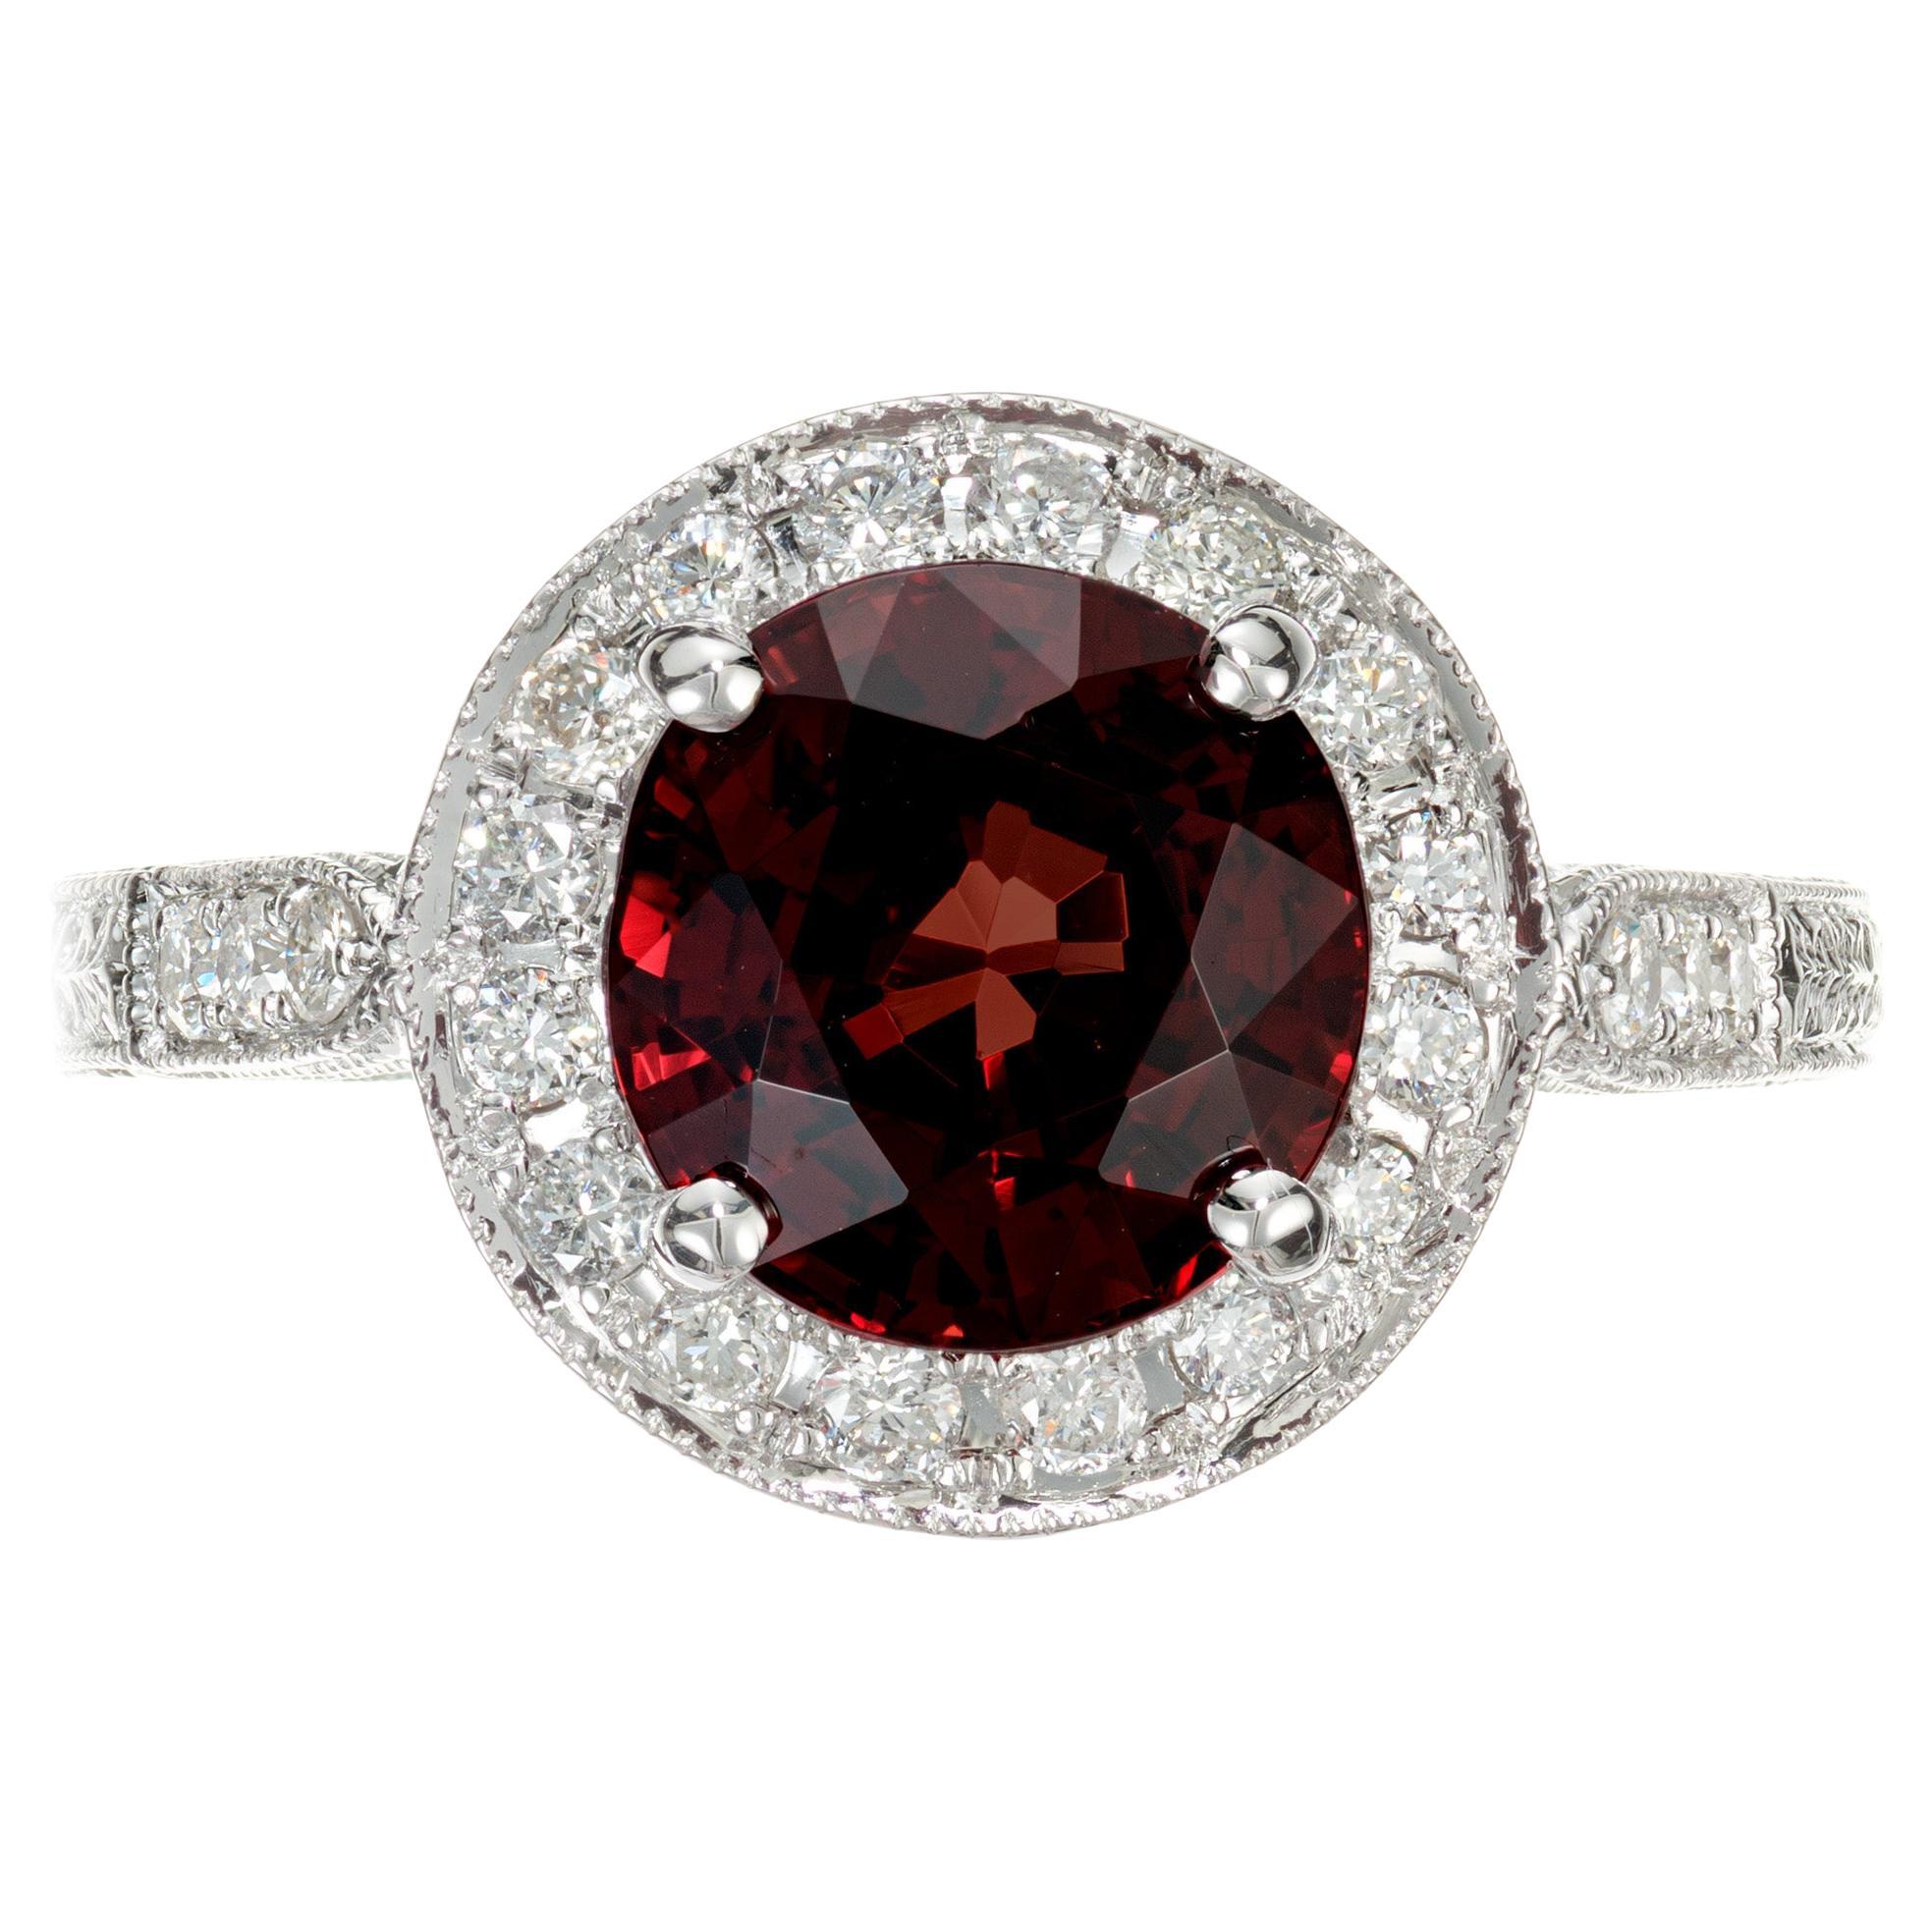 Peter Suchy GIA Certified 2.42 Carat Red Spinel Diamond Halo White Gold Ring For Sale